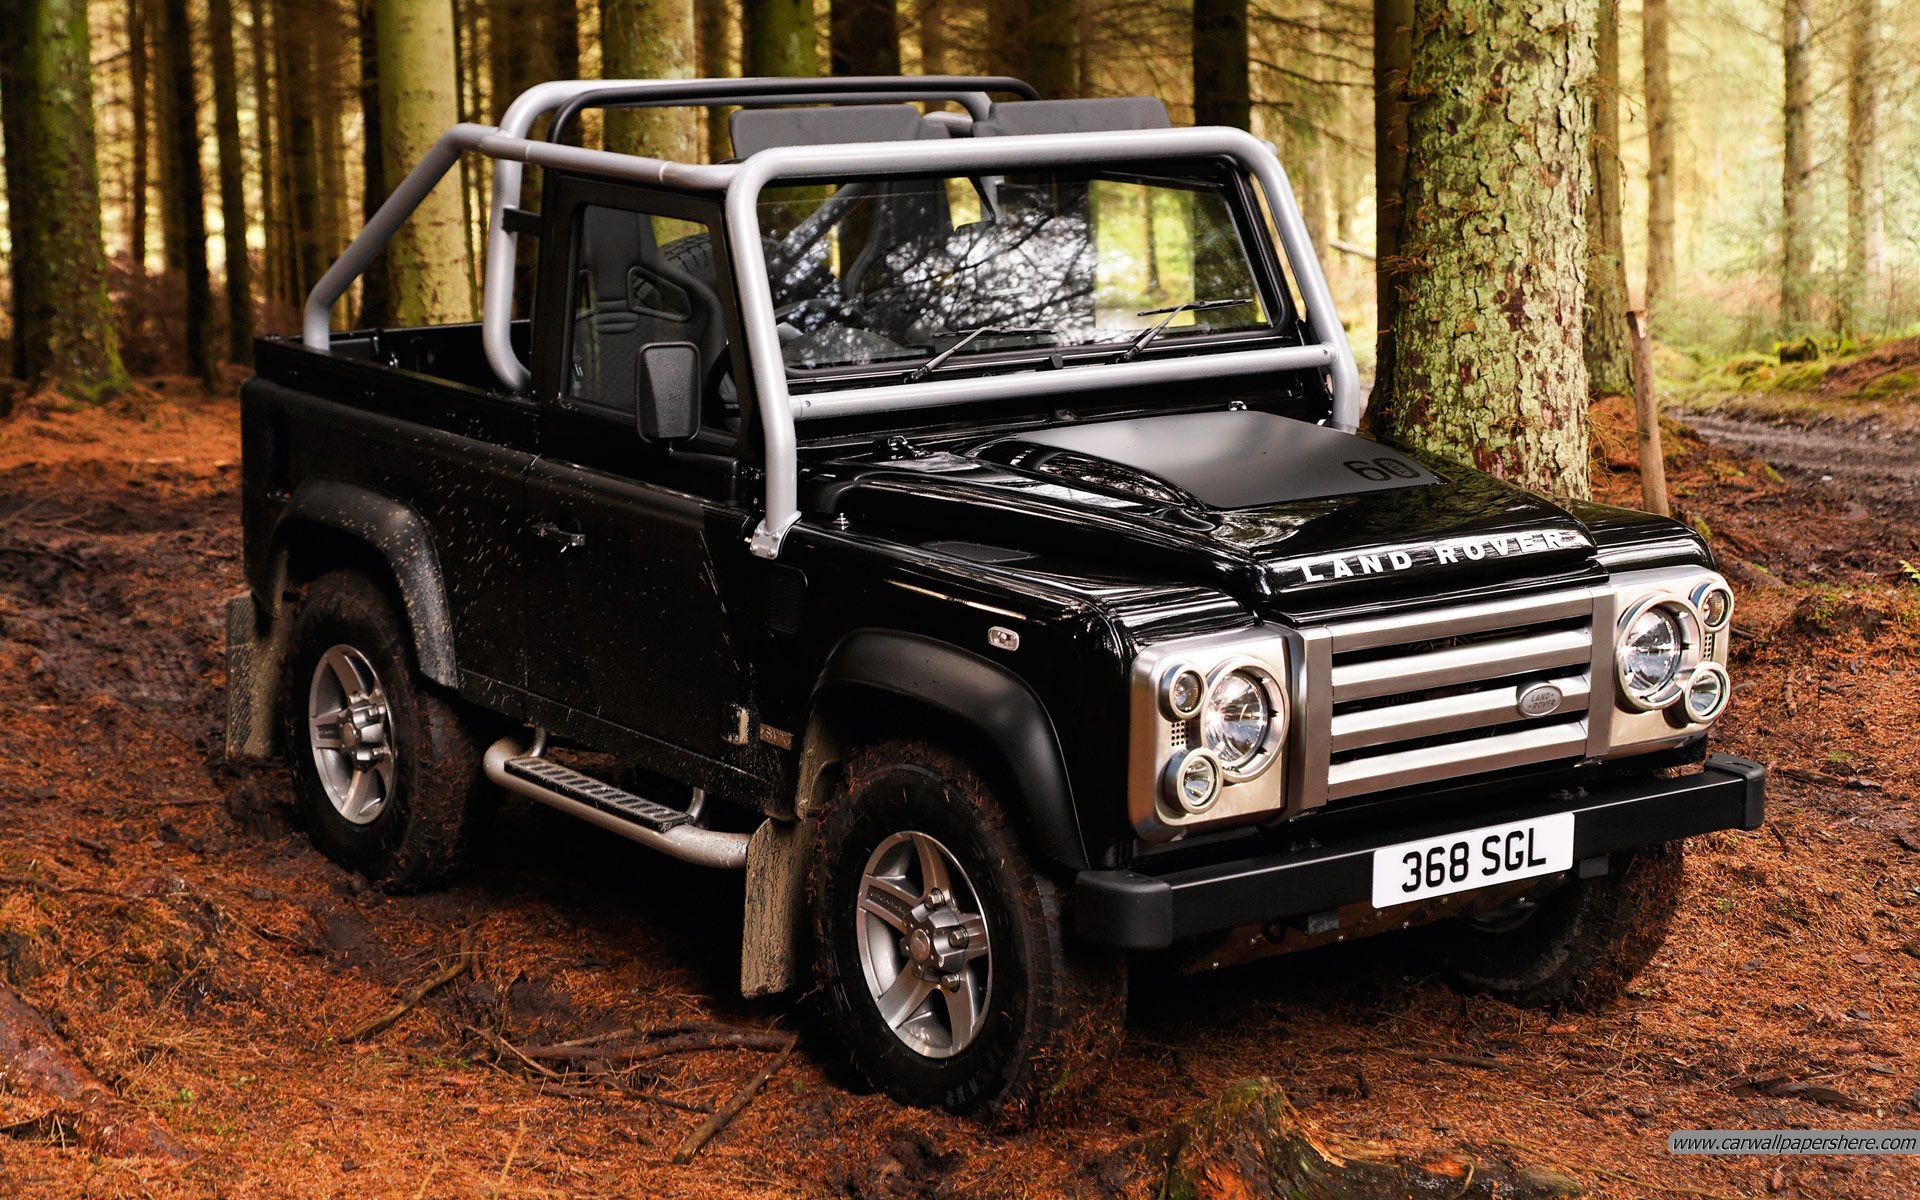 vehicles, land rover wallpaper for mobile